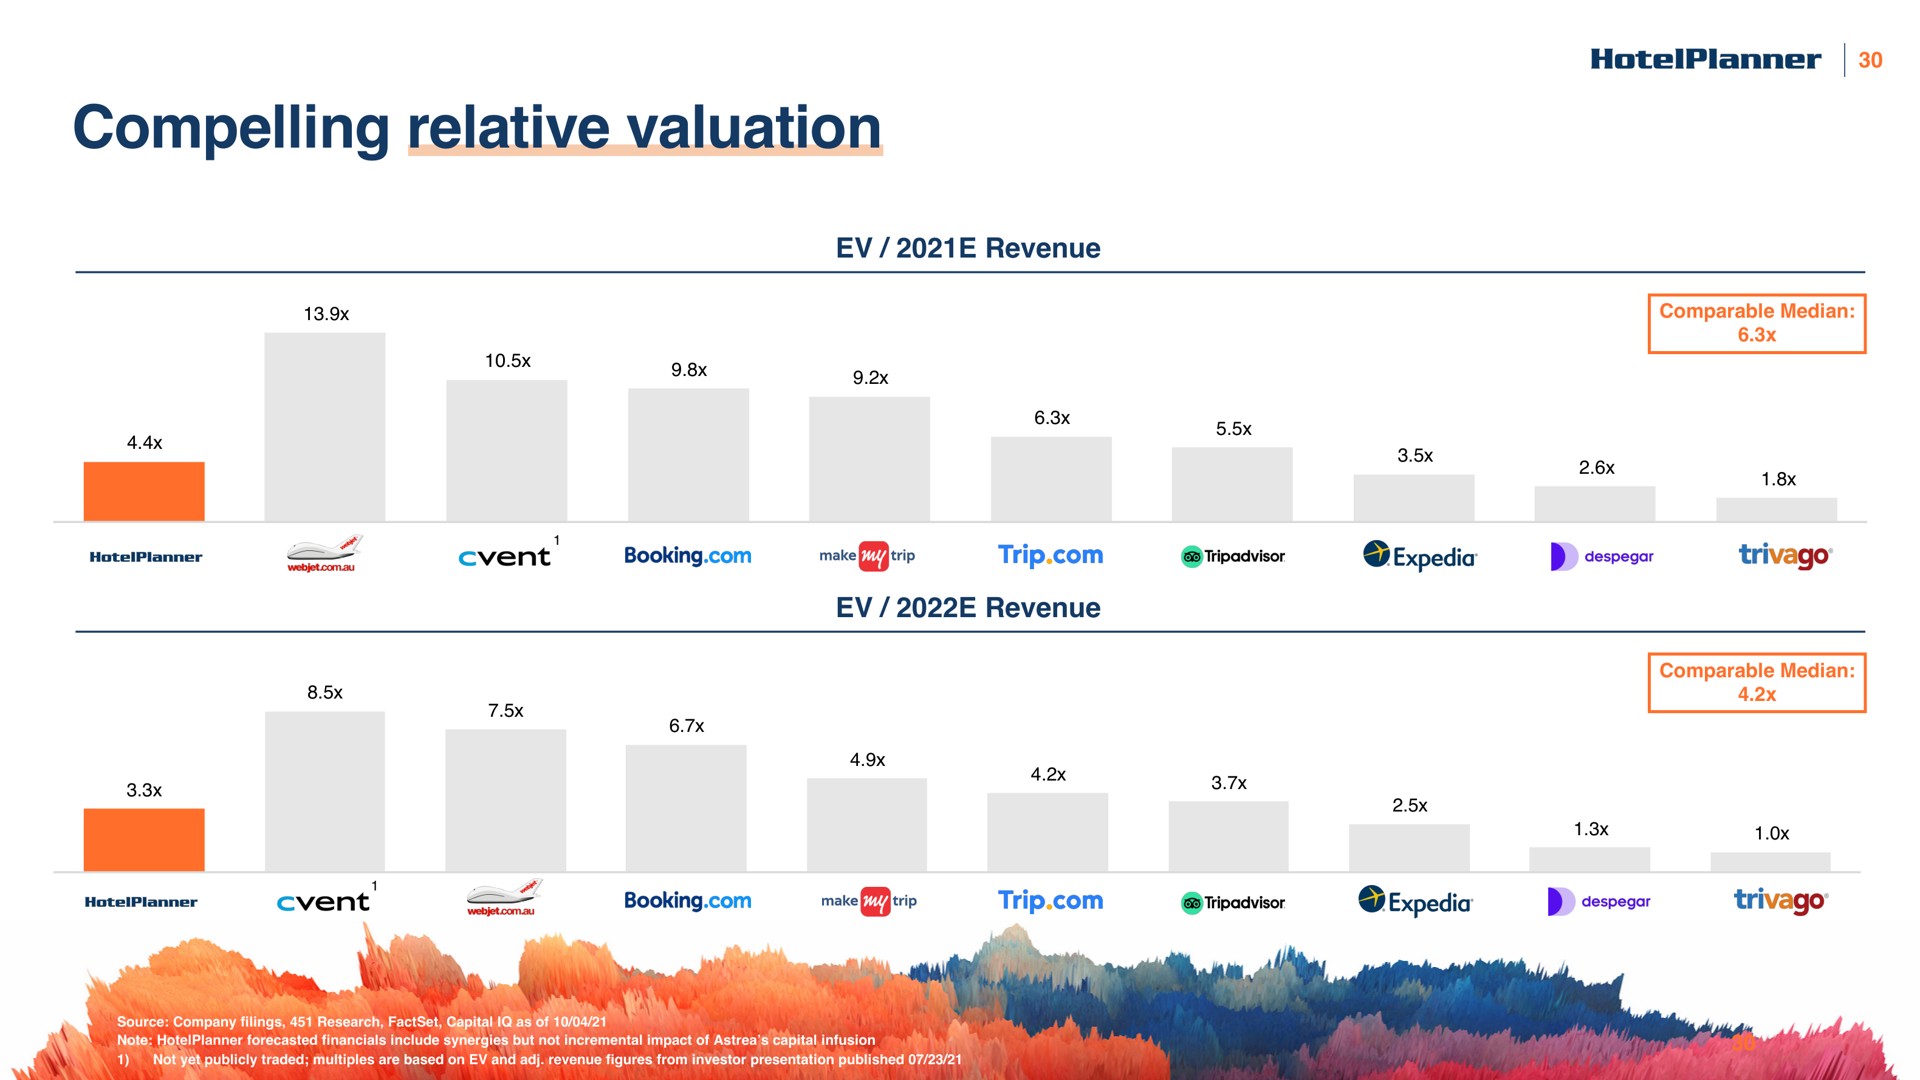 compelling relative valuation | HotelPlanner